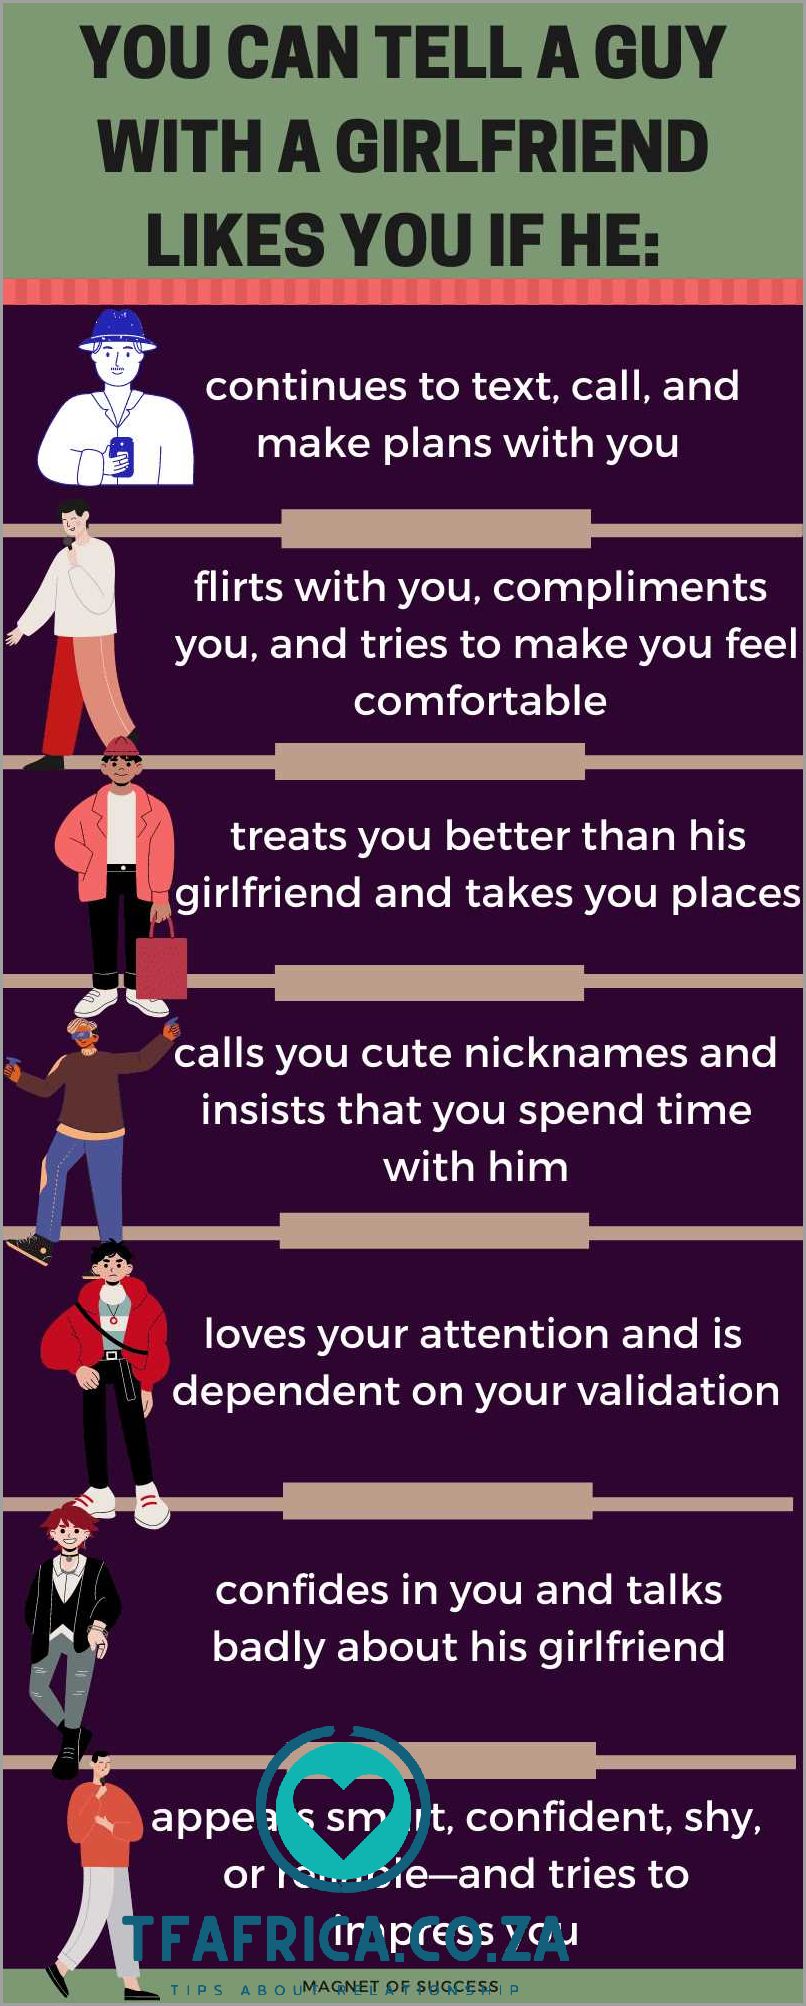 Recognizing the Signs of Flirting